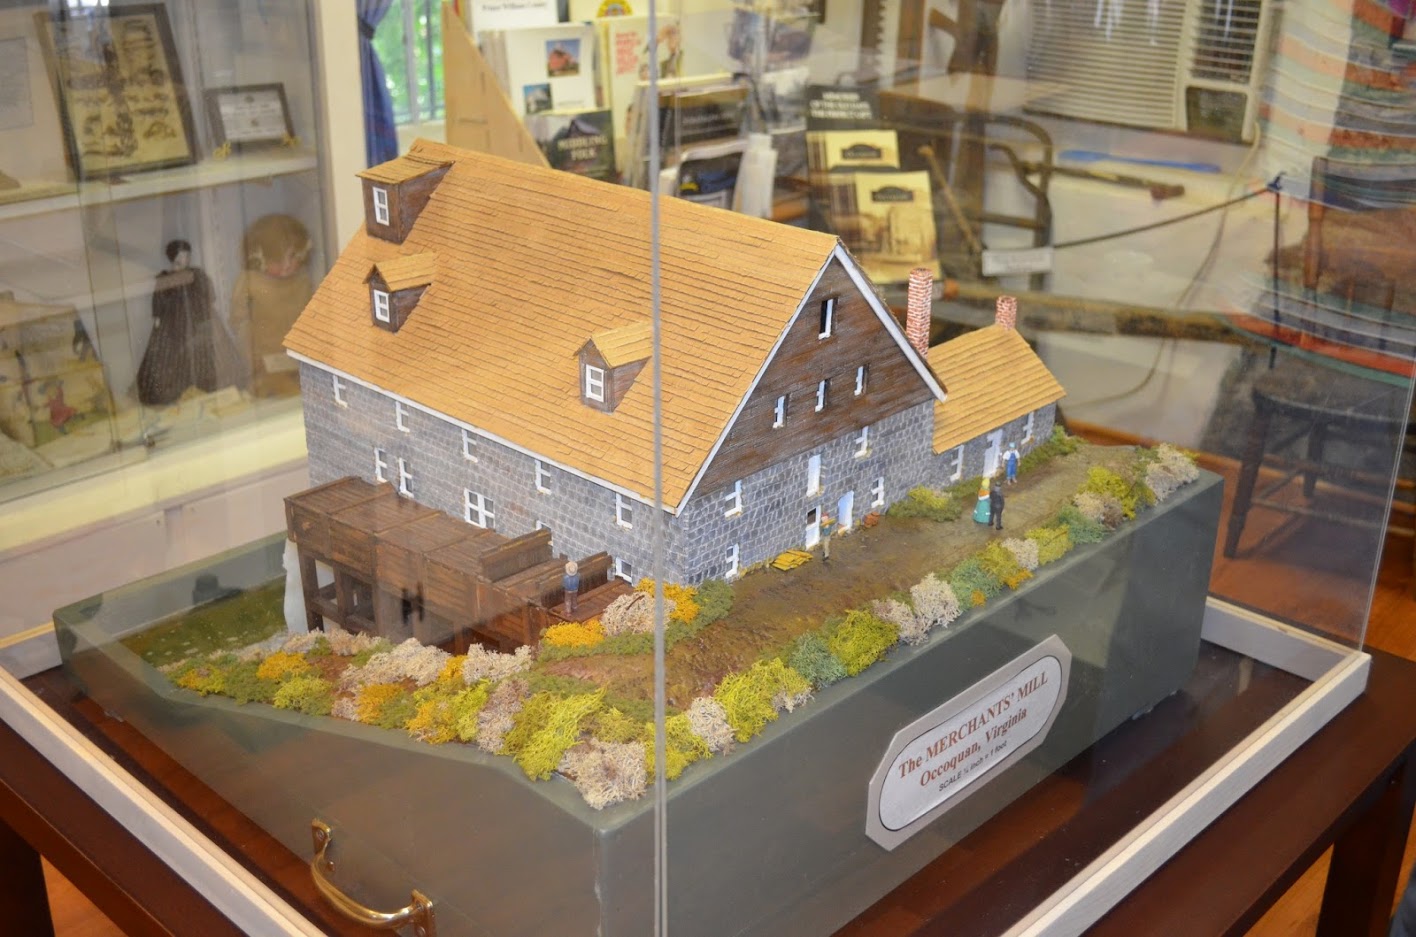 The Occoquan Museum, also known as the Mill House Museum, is at 413 Mill Street Occoquan, Virginia 22134.